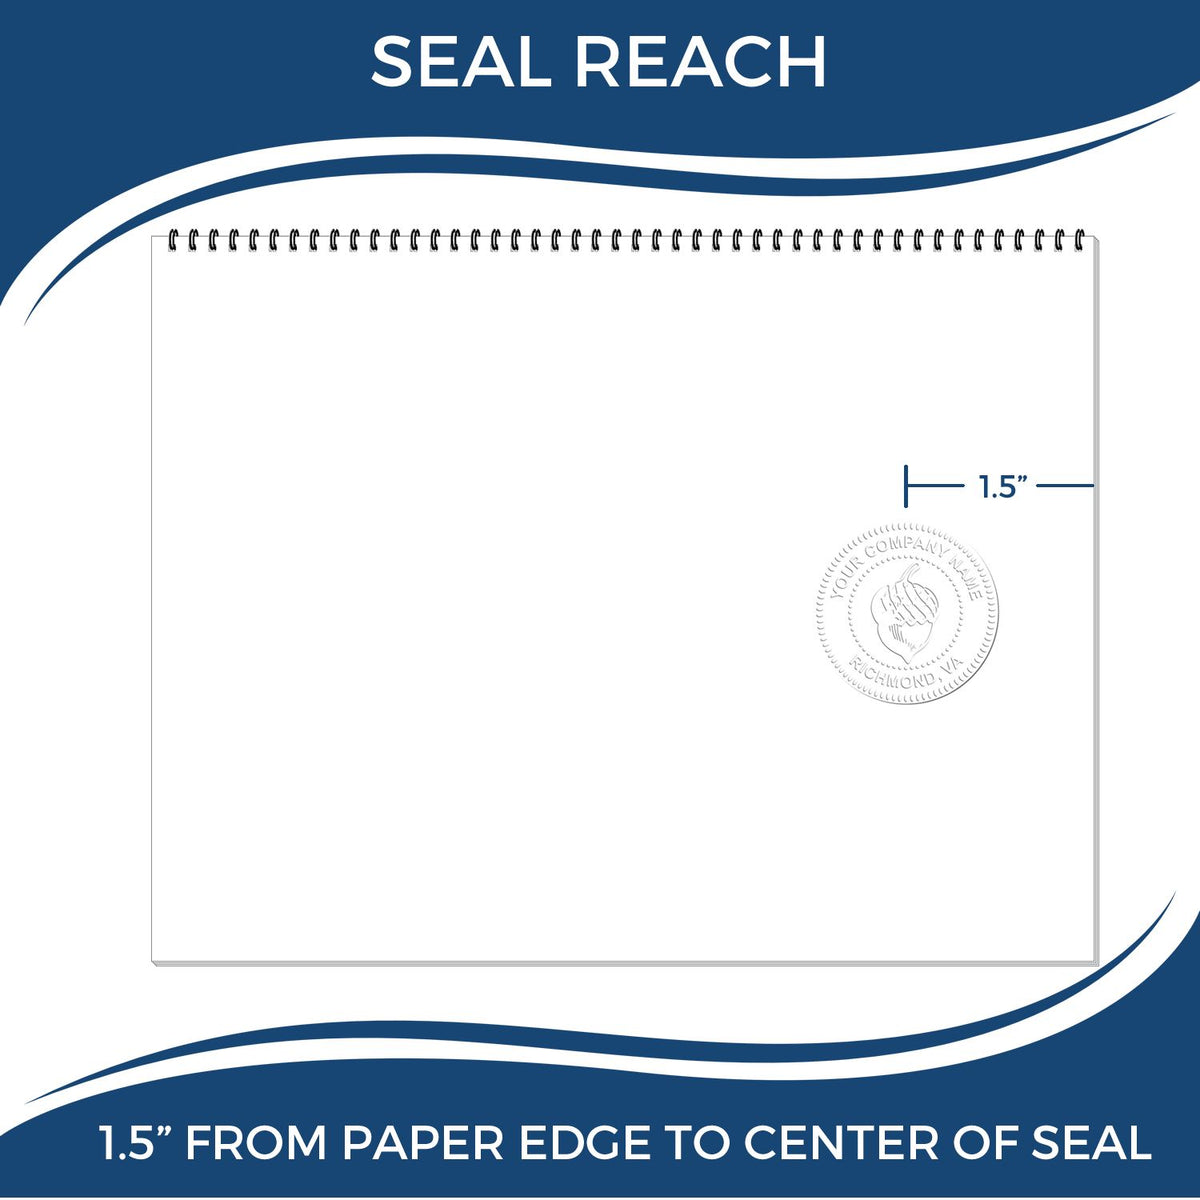 An infographic showing the seal reach which is represented by a ruler and a miniature seal image of the Hybrid New Mexico Engineer Seal